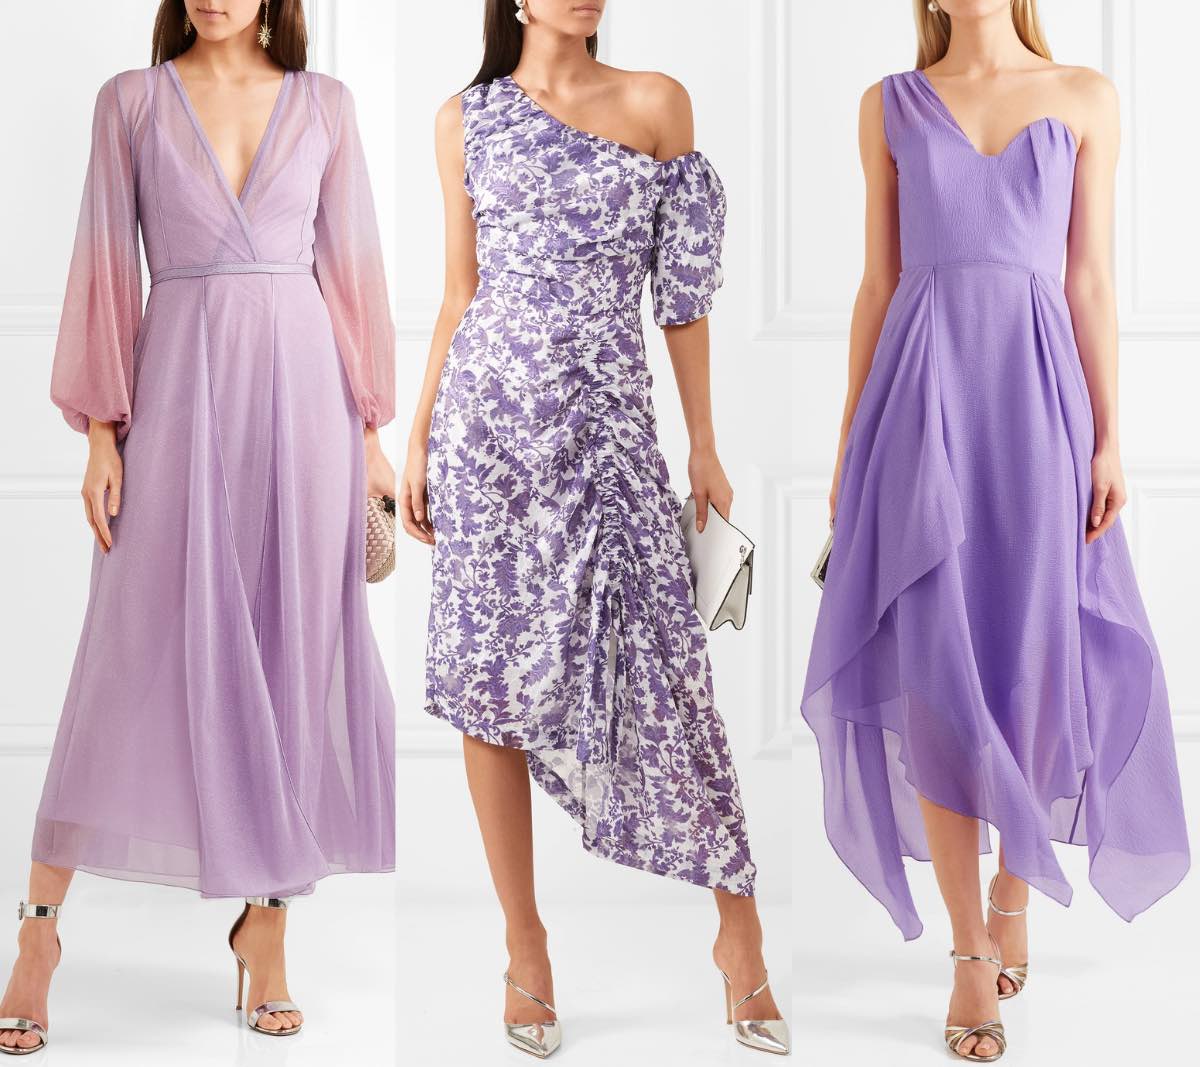 Perfect Pairings: Choosing the Right Shoes for a Lavender Dress ...